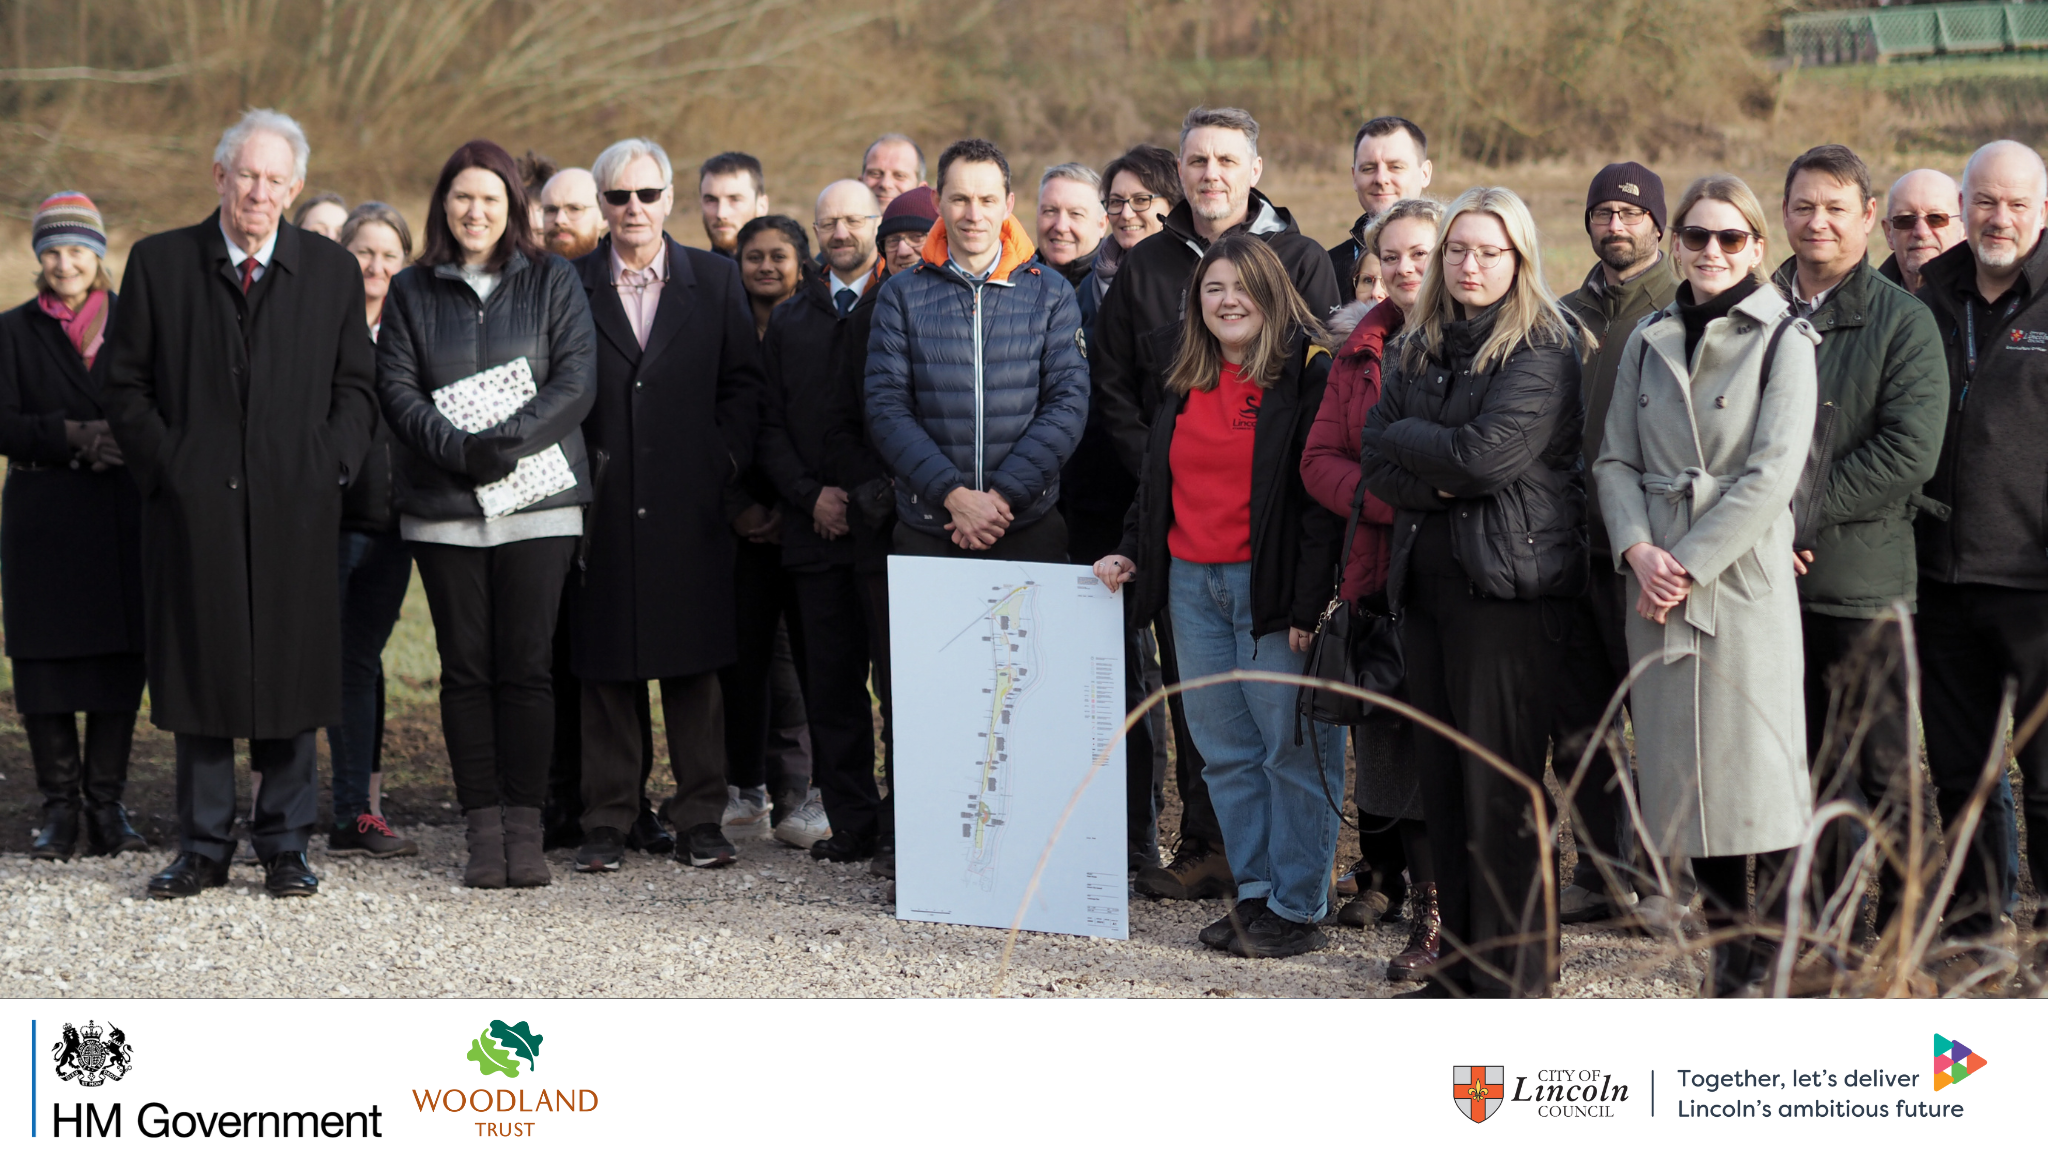 Group image at Hope Wood site